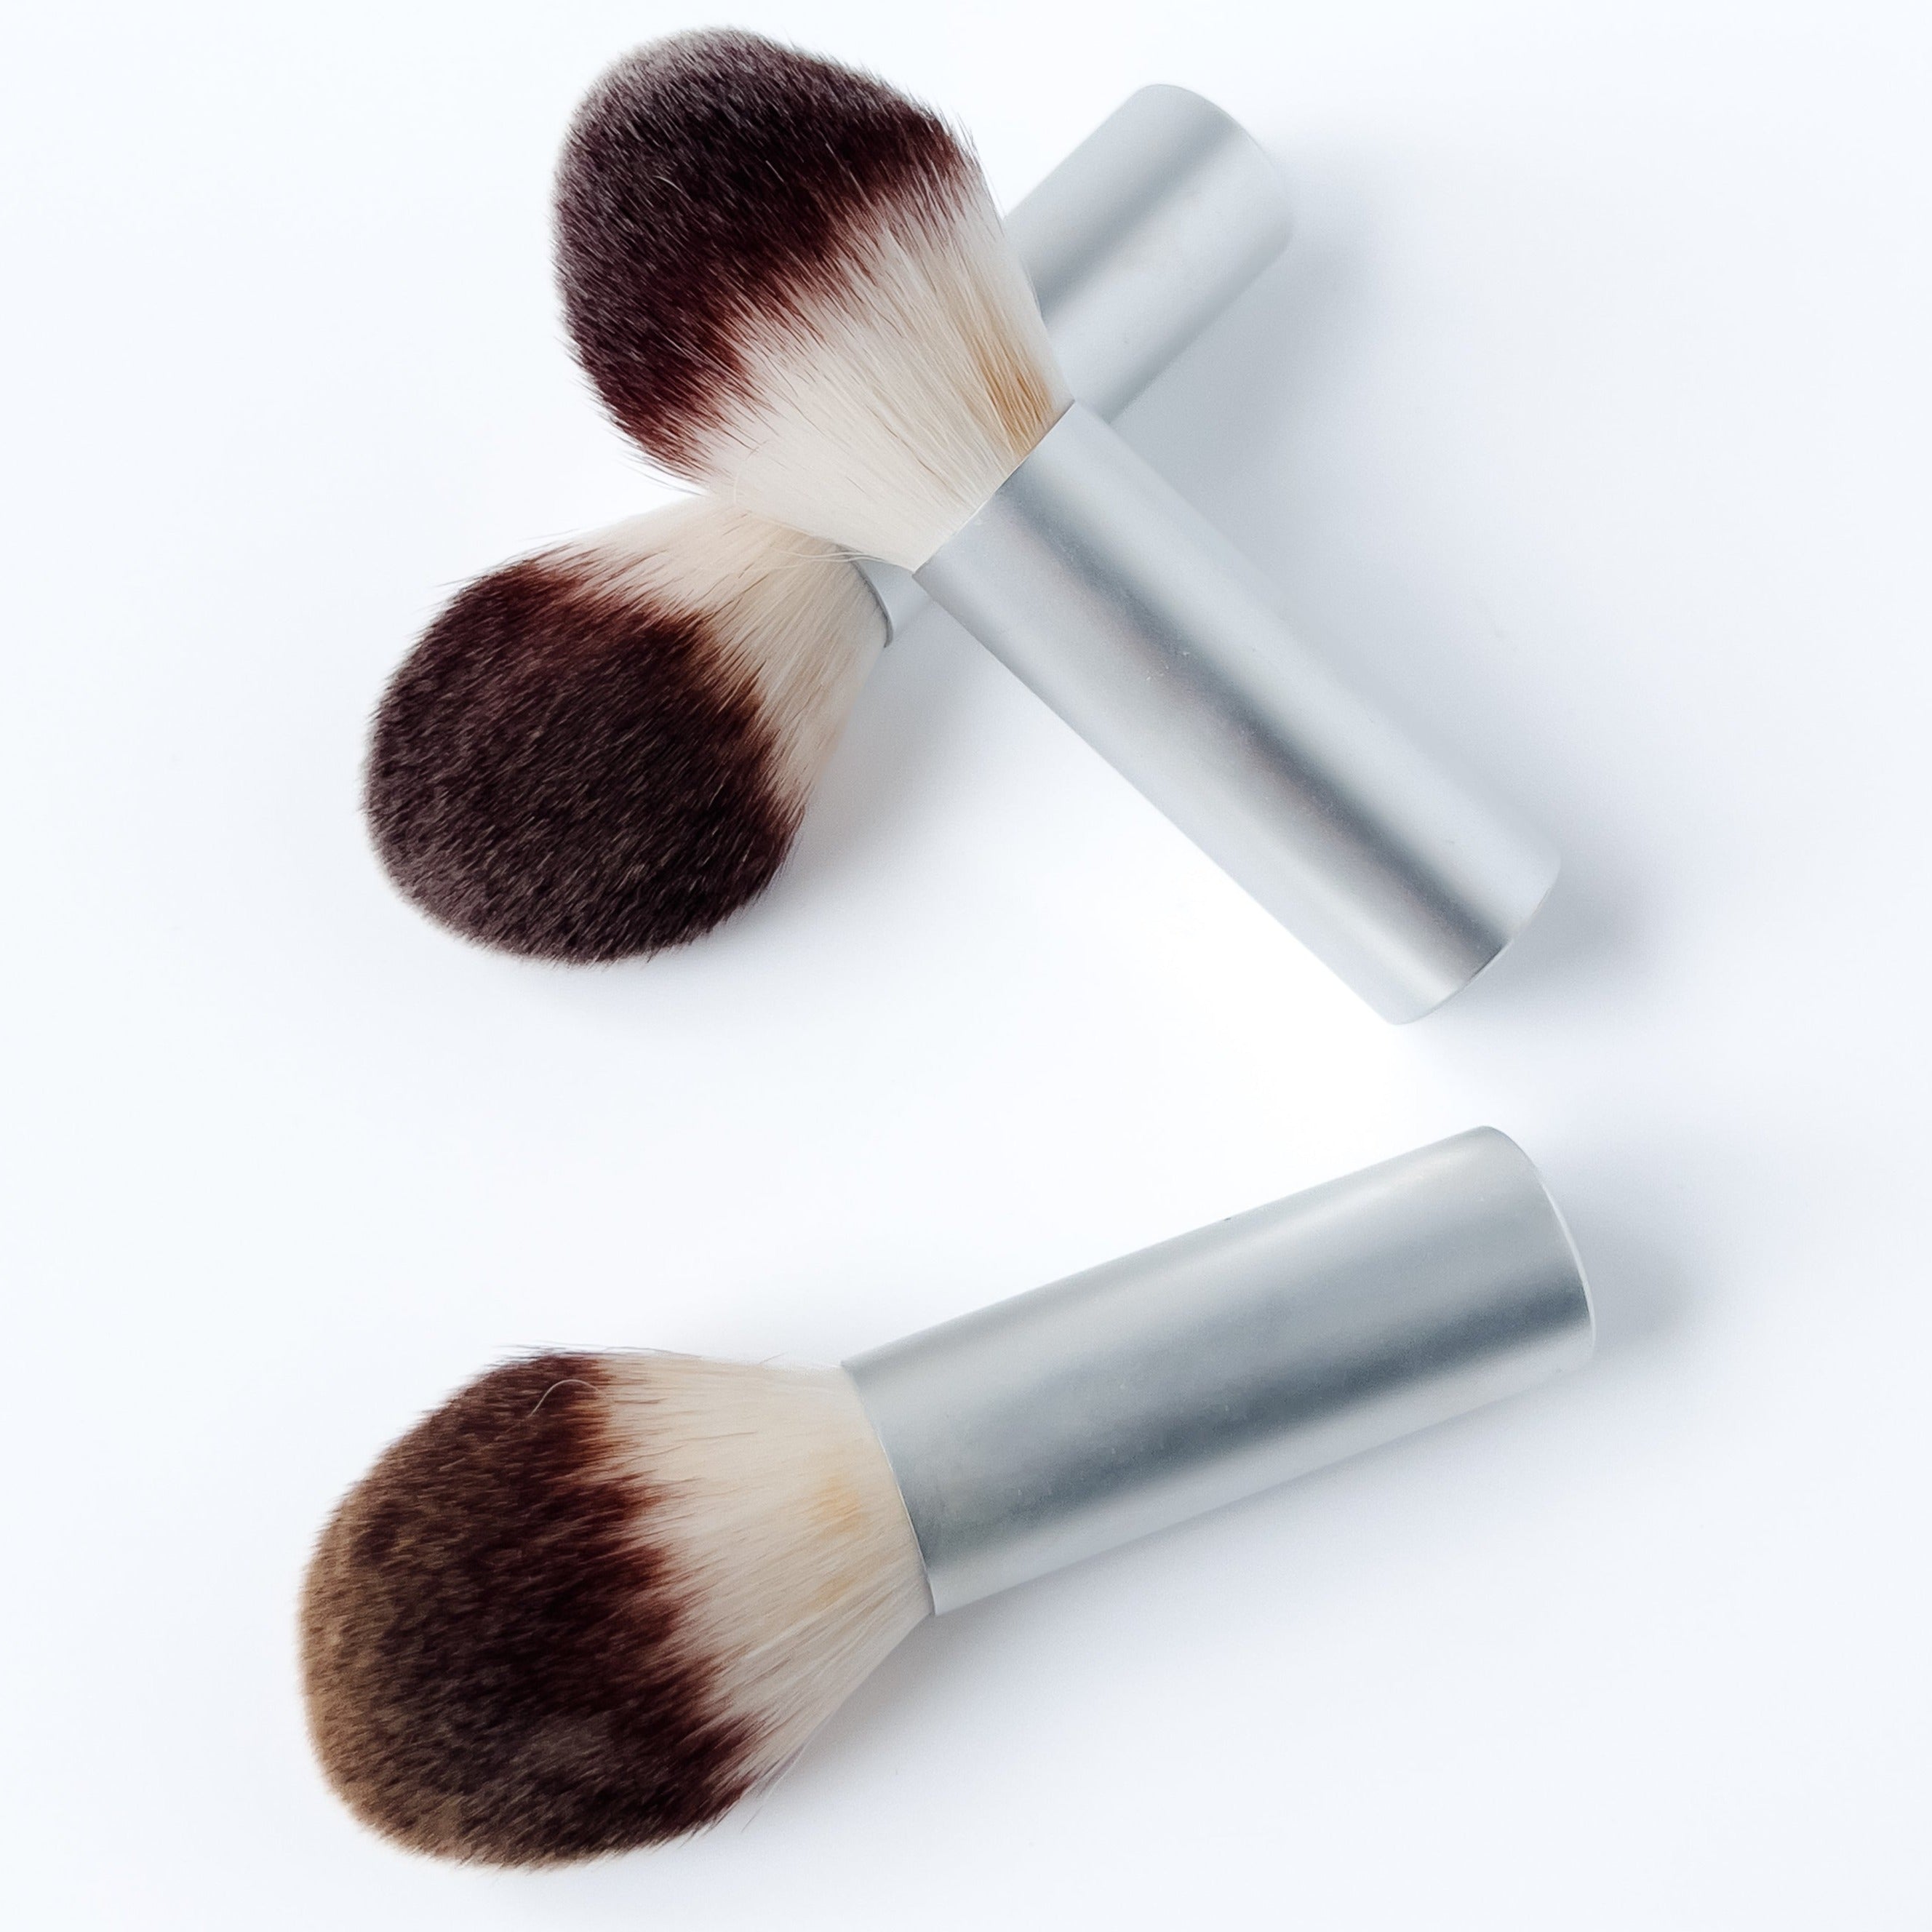 Three large foundation brushes are shown scattered on a white background. The brush has a silver body with "La Bella Donna" in white. The bristles start white and become a deep brown towards the tips.